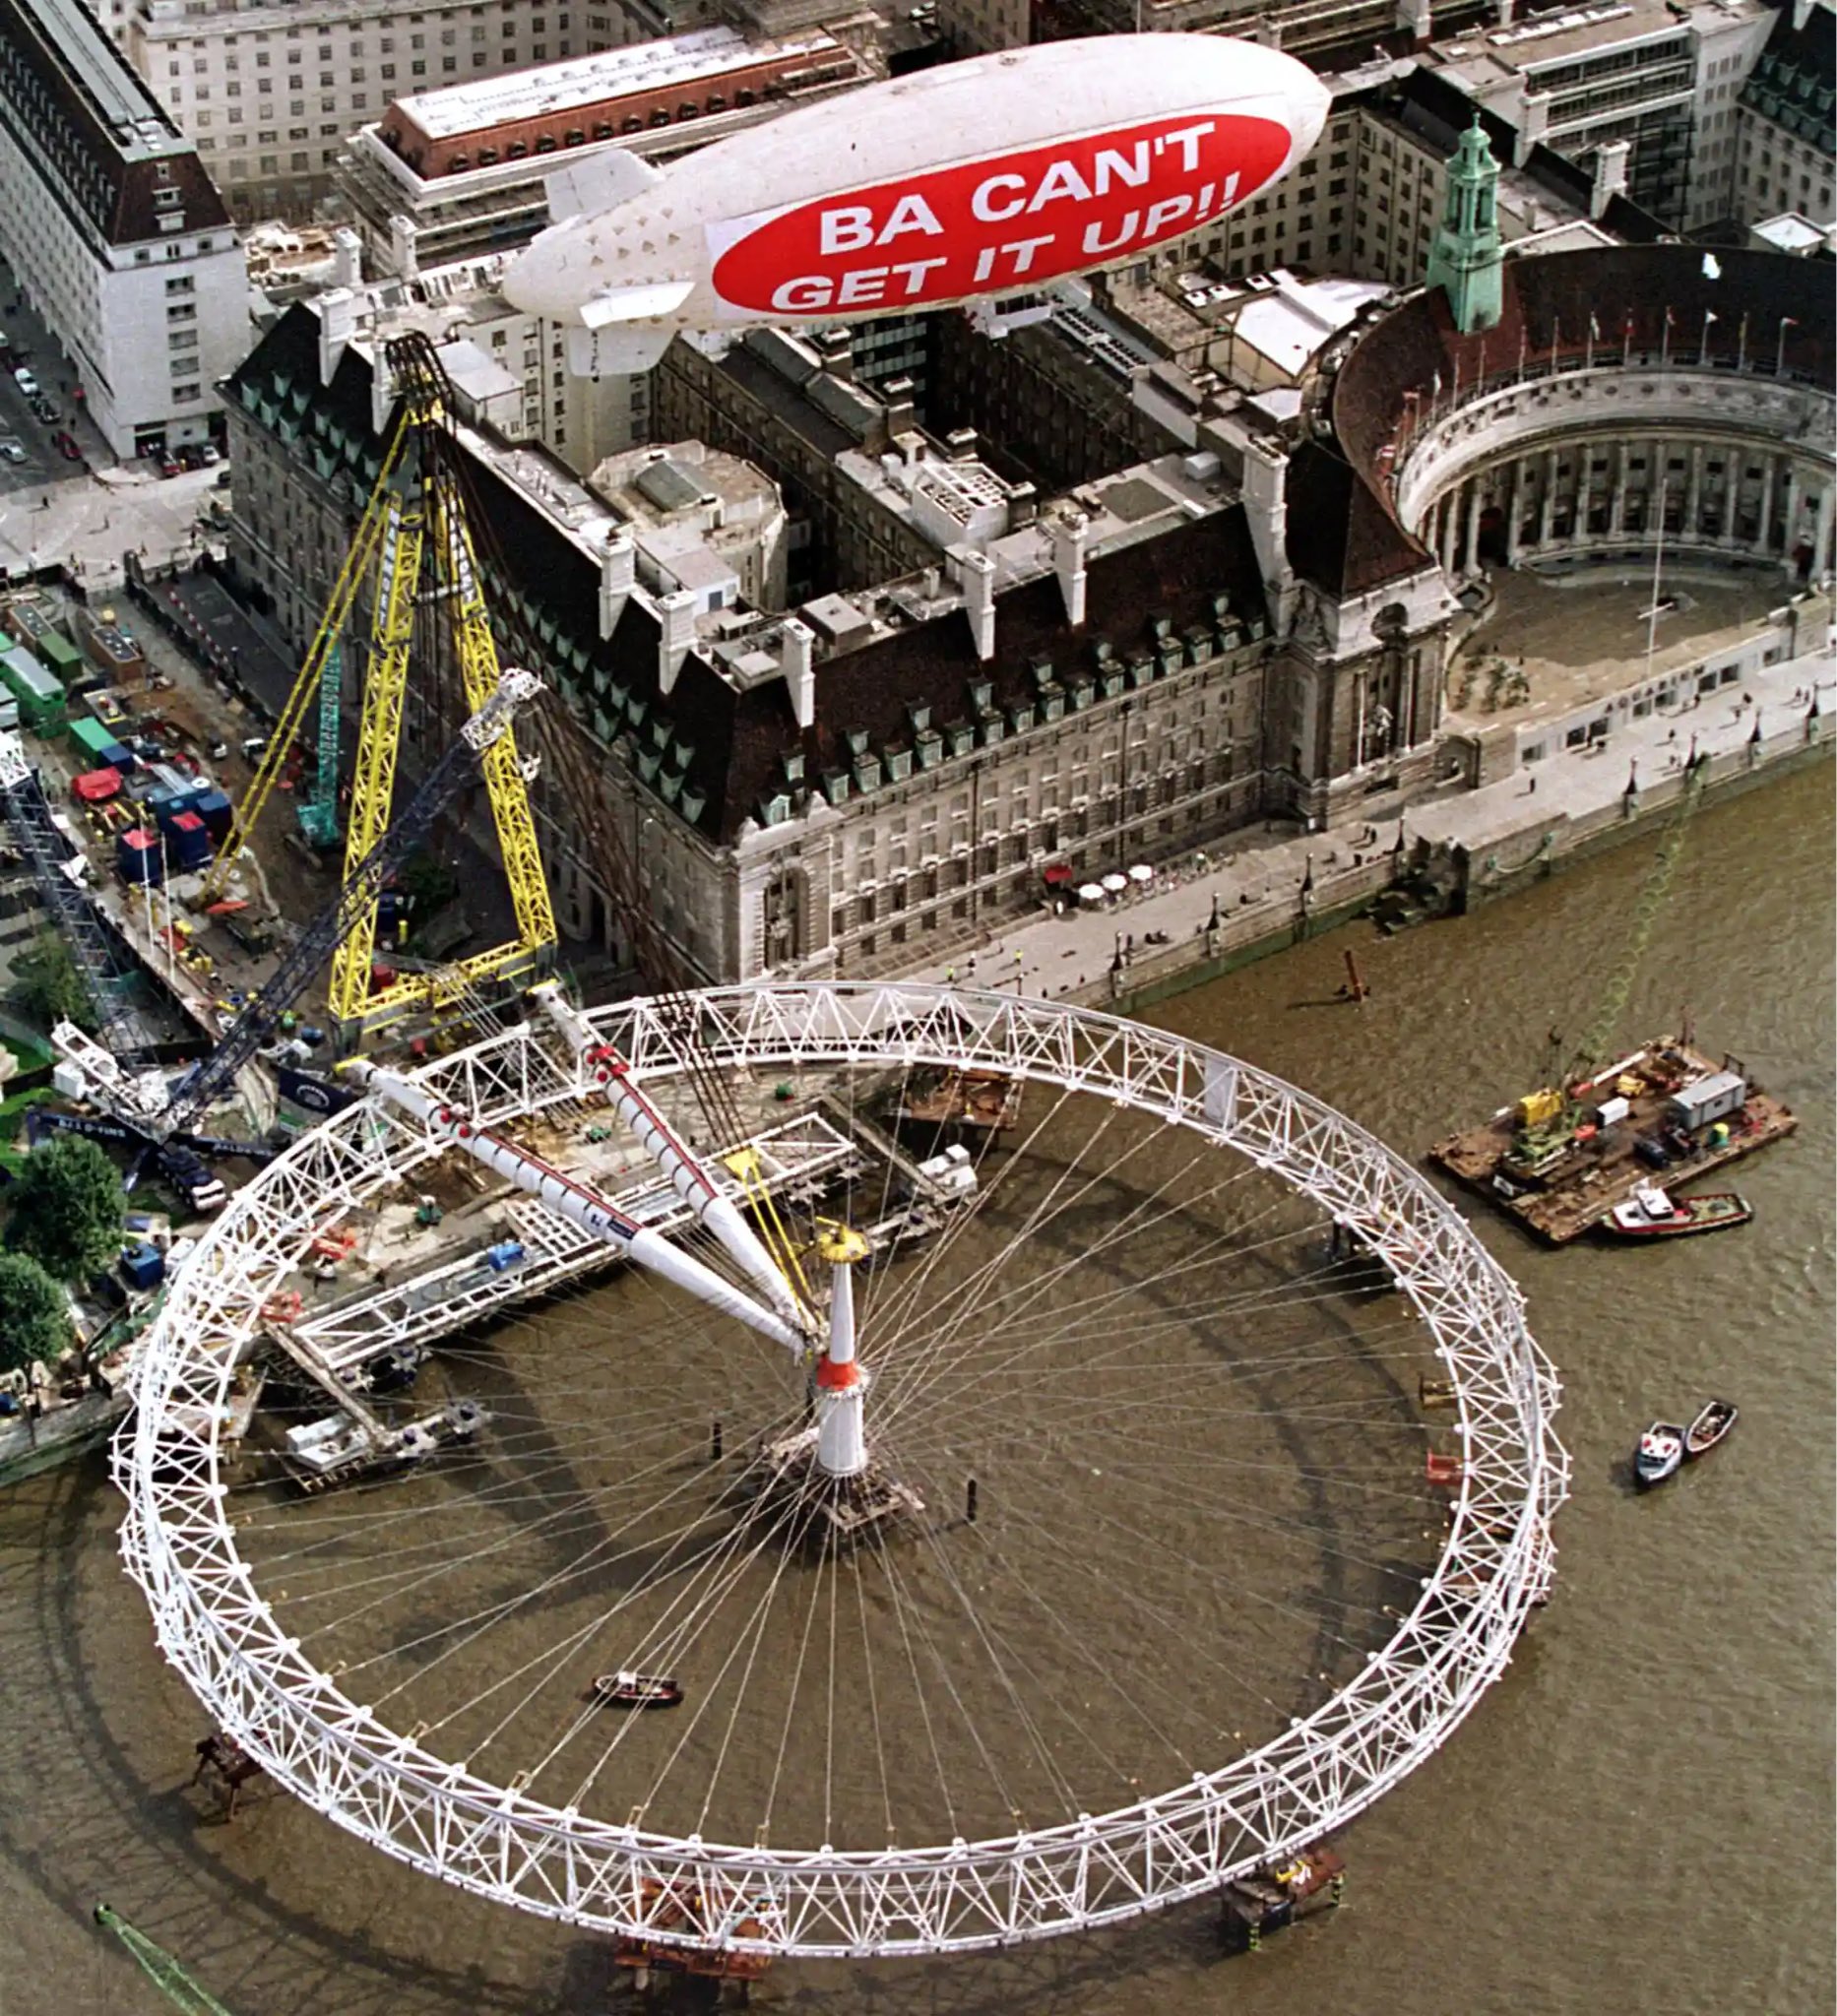 blimp over the disassembled London Eye with a bold white caption “BA CAN’T GET IT UP!!” over red background